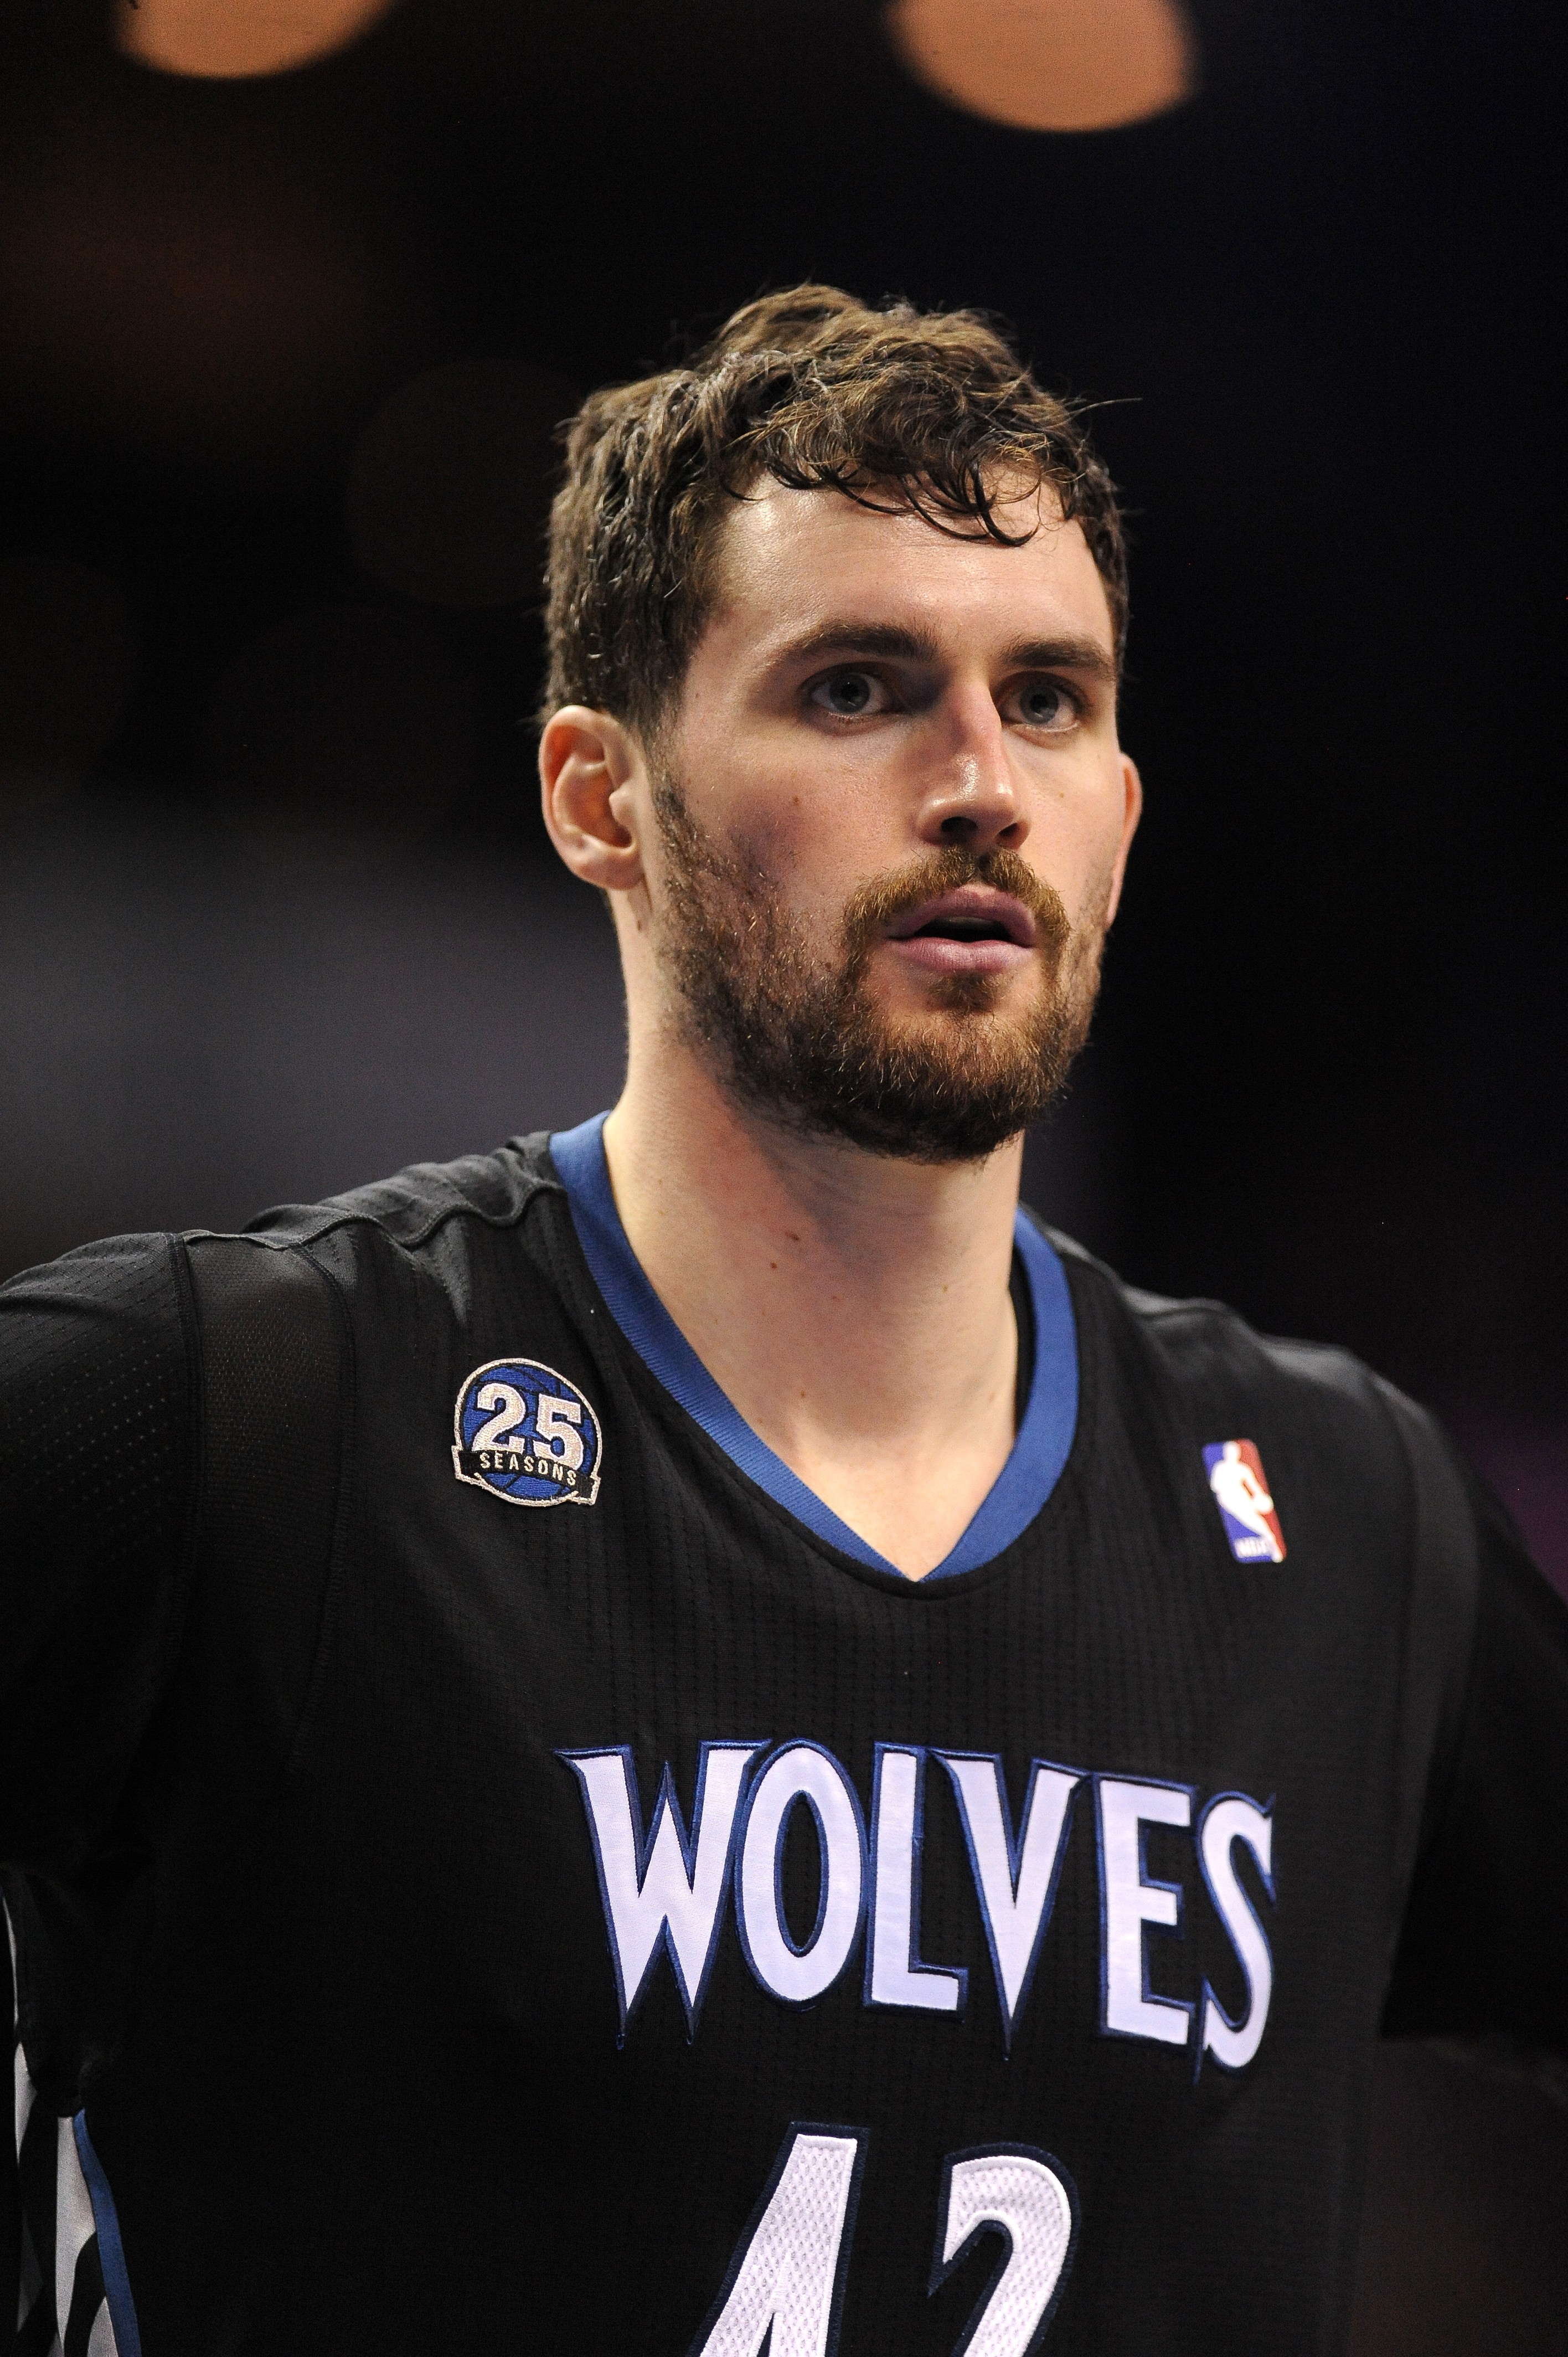 Kevin Love of the Minnesota Timberwolves during a NBA game between the Charlotte Bobcats and the Minnesota Timberwolves at the Time Warner Arena on March 14, 2014 in Charlotte, North Carolina